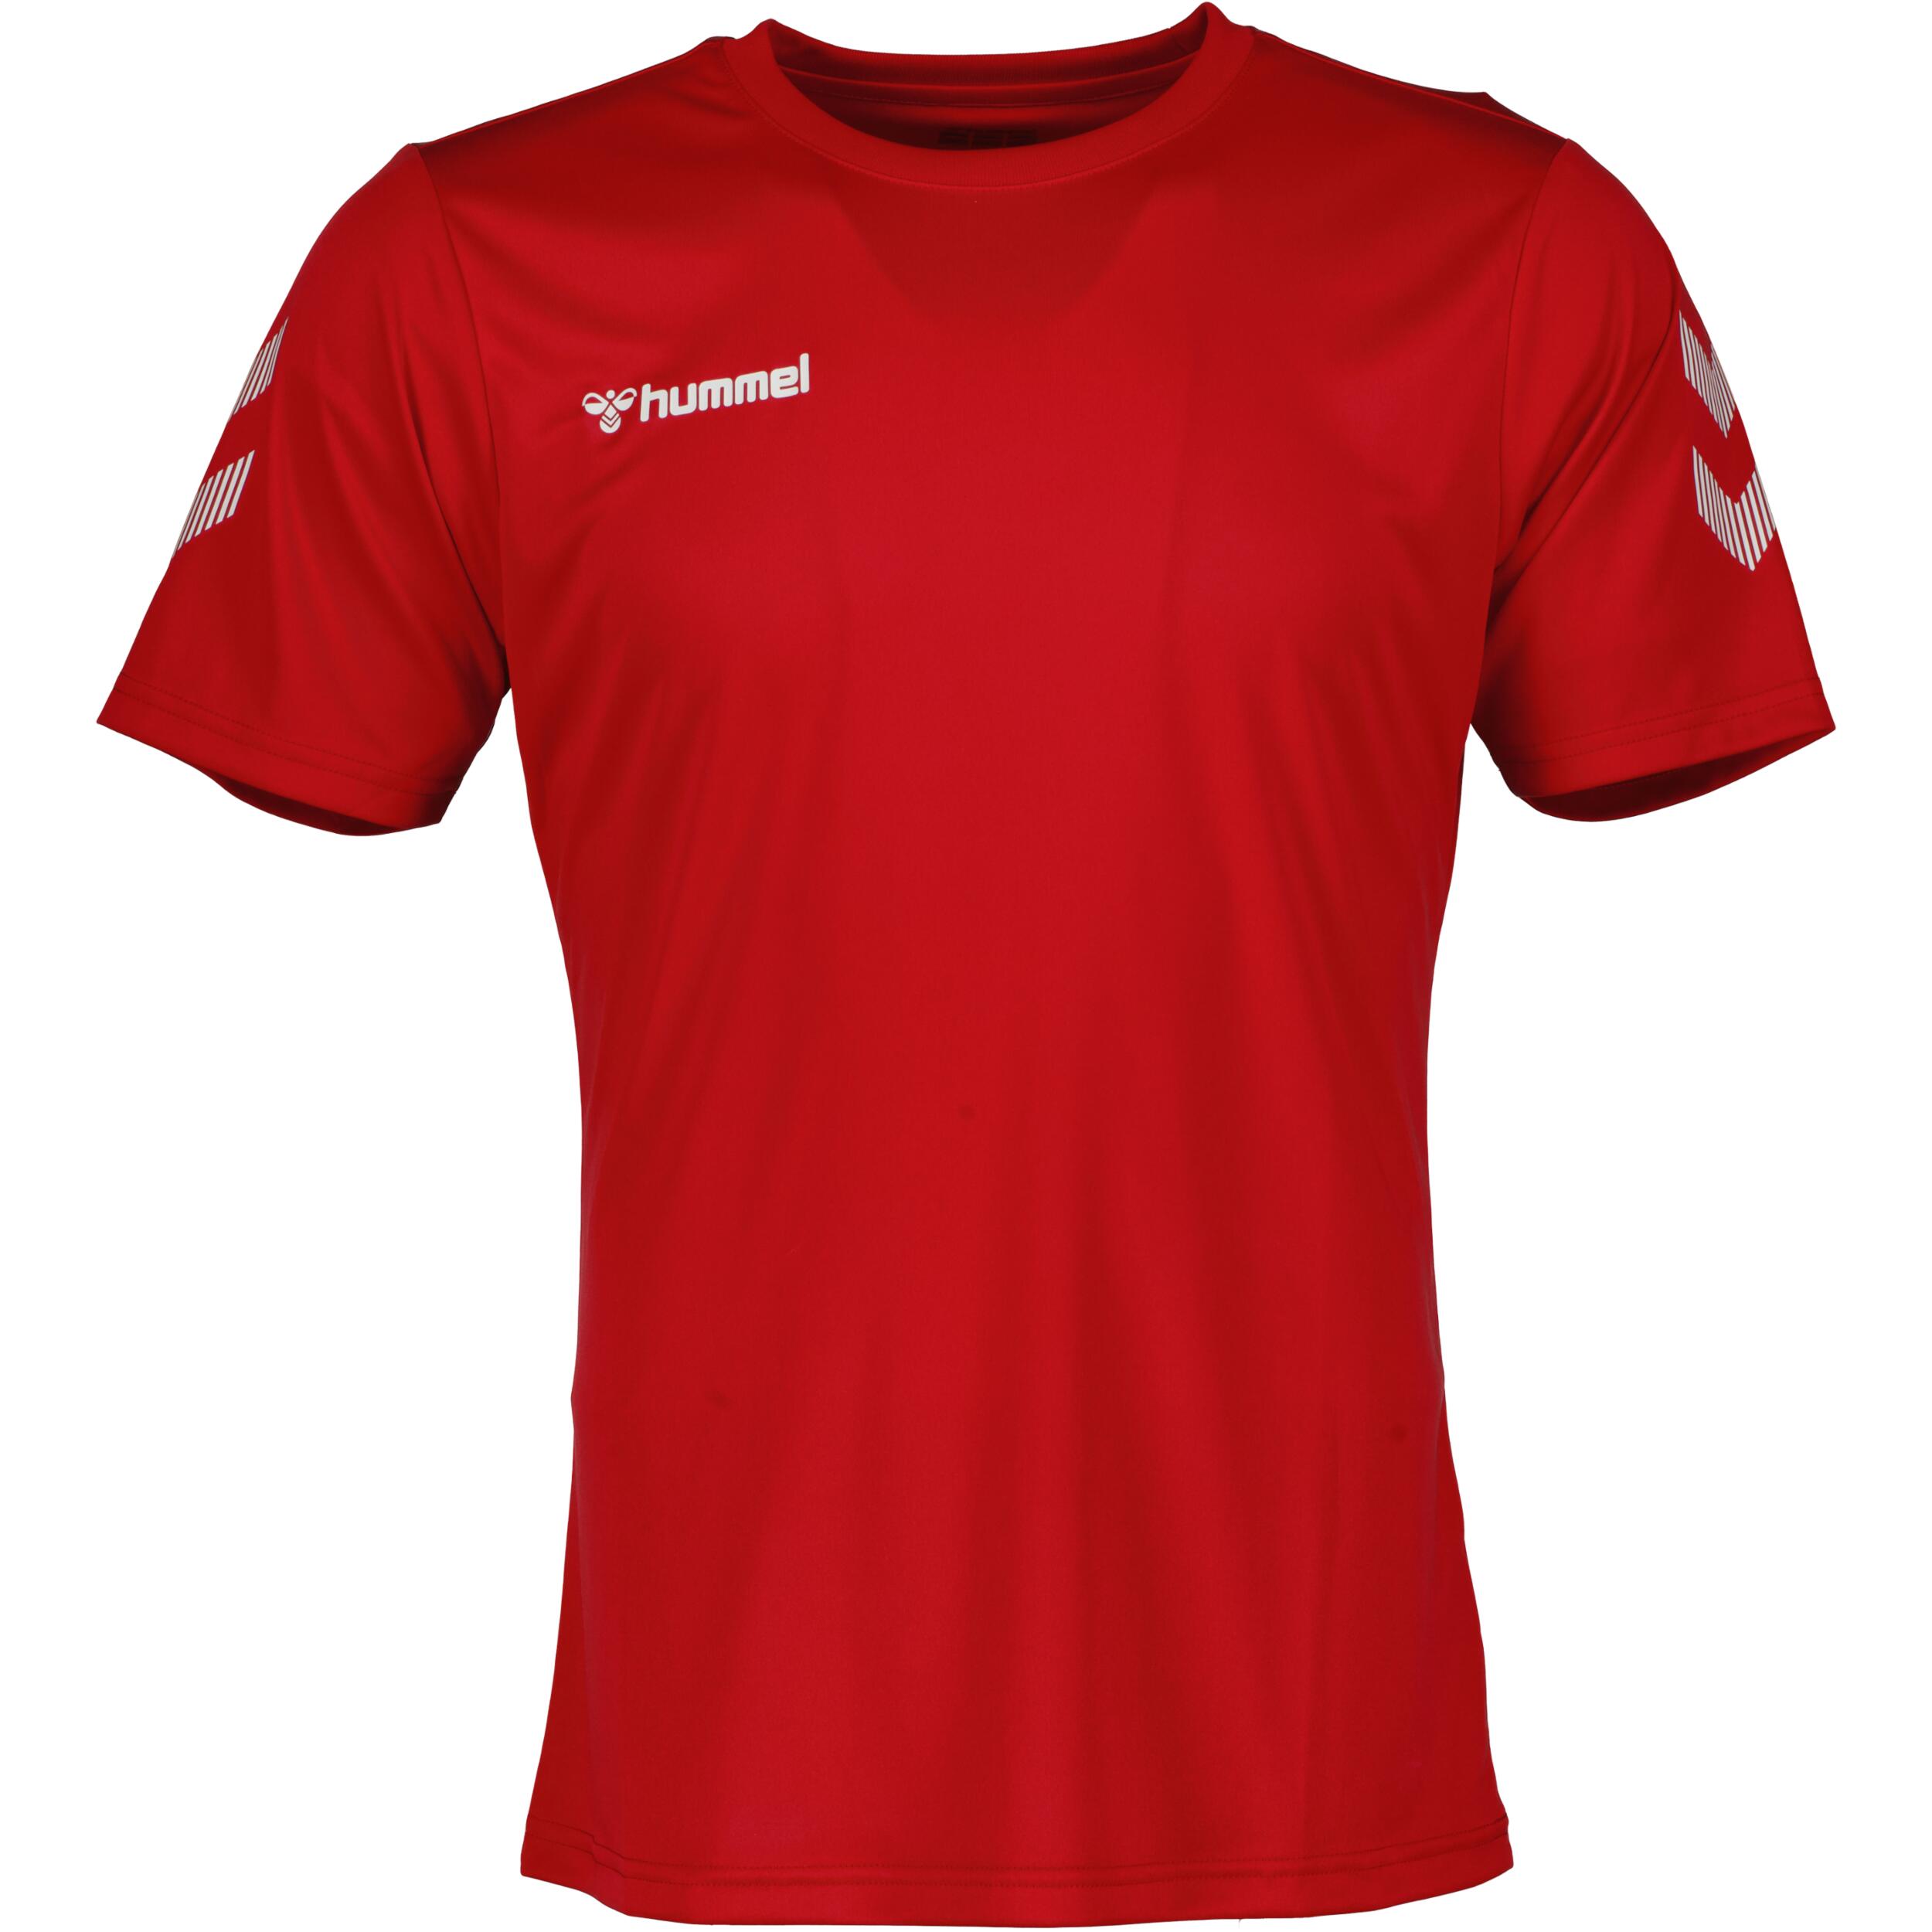 HUMMEL Solo jersey for men, great for football, in true red